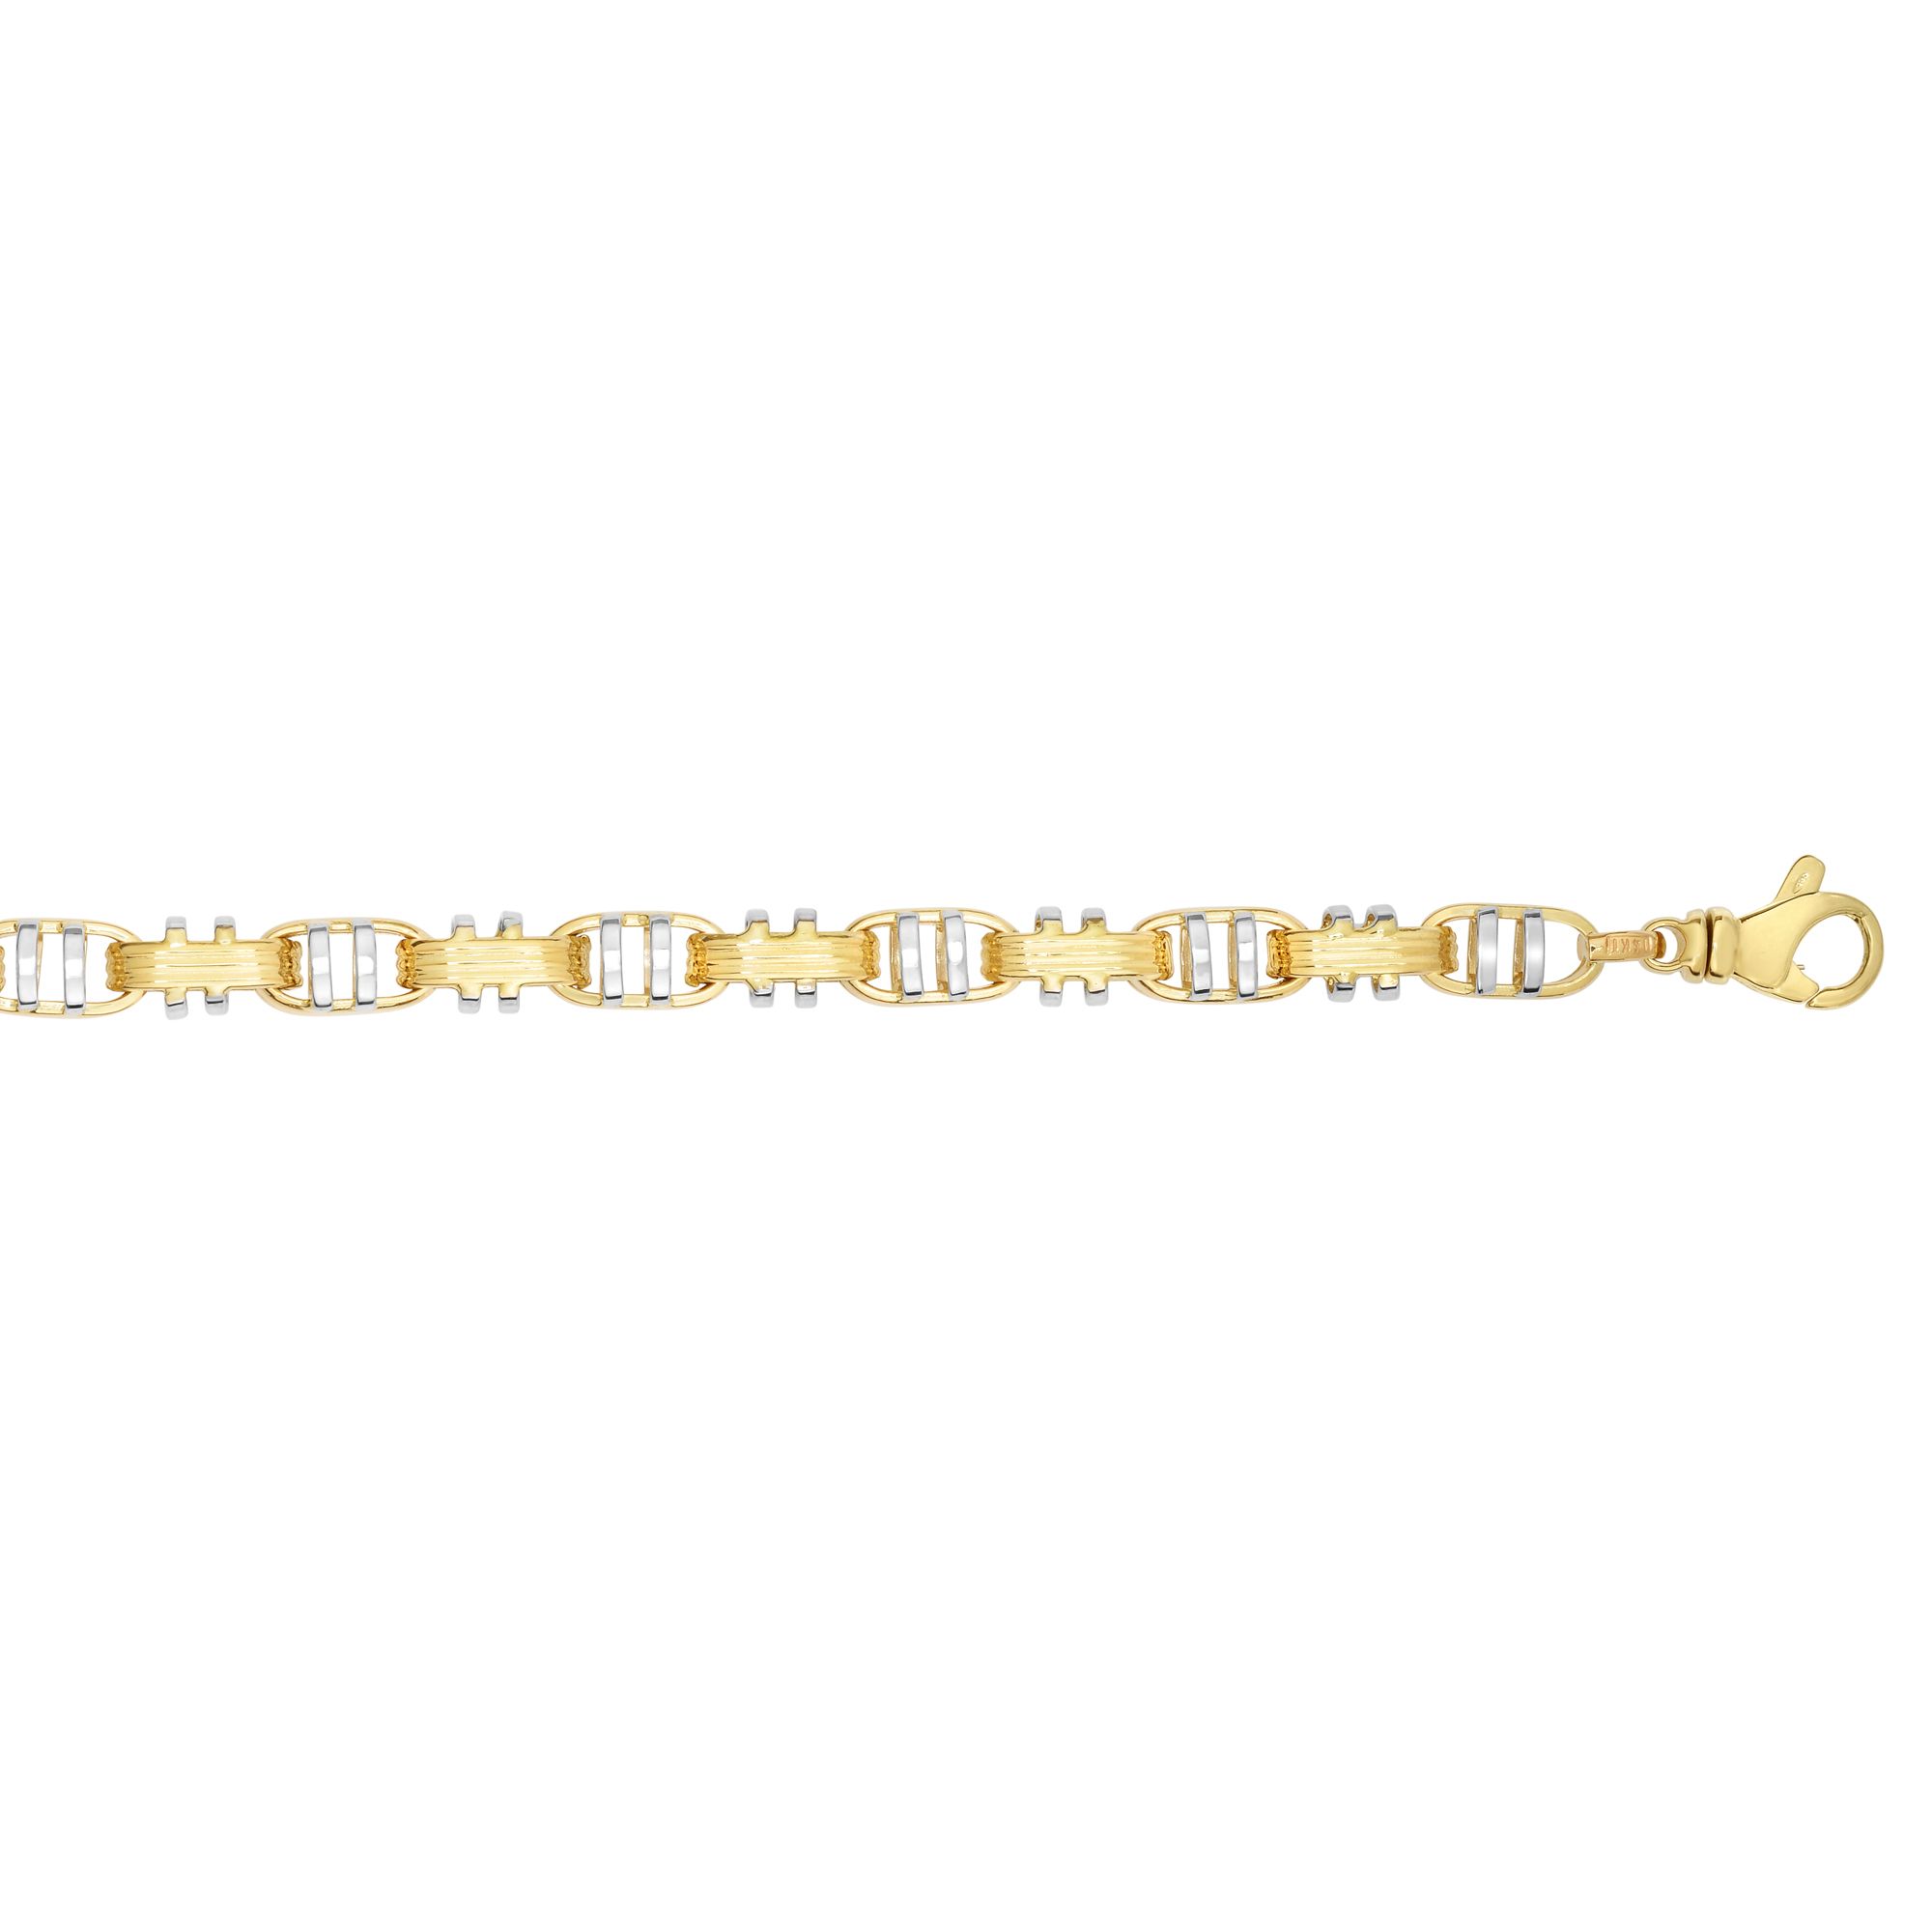 14kt 8.5 inches Yellow+White Gold Shiny+Ridged Fancy Dou ble Bar Mariner Style Link Bracelet with Lobster C lasp